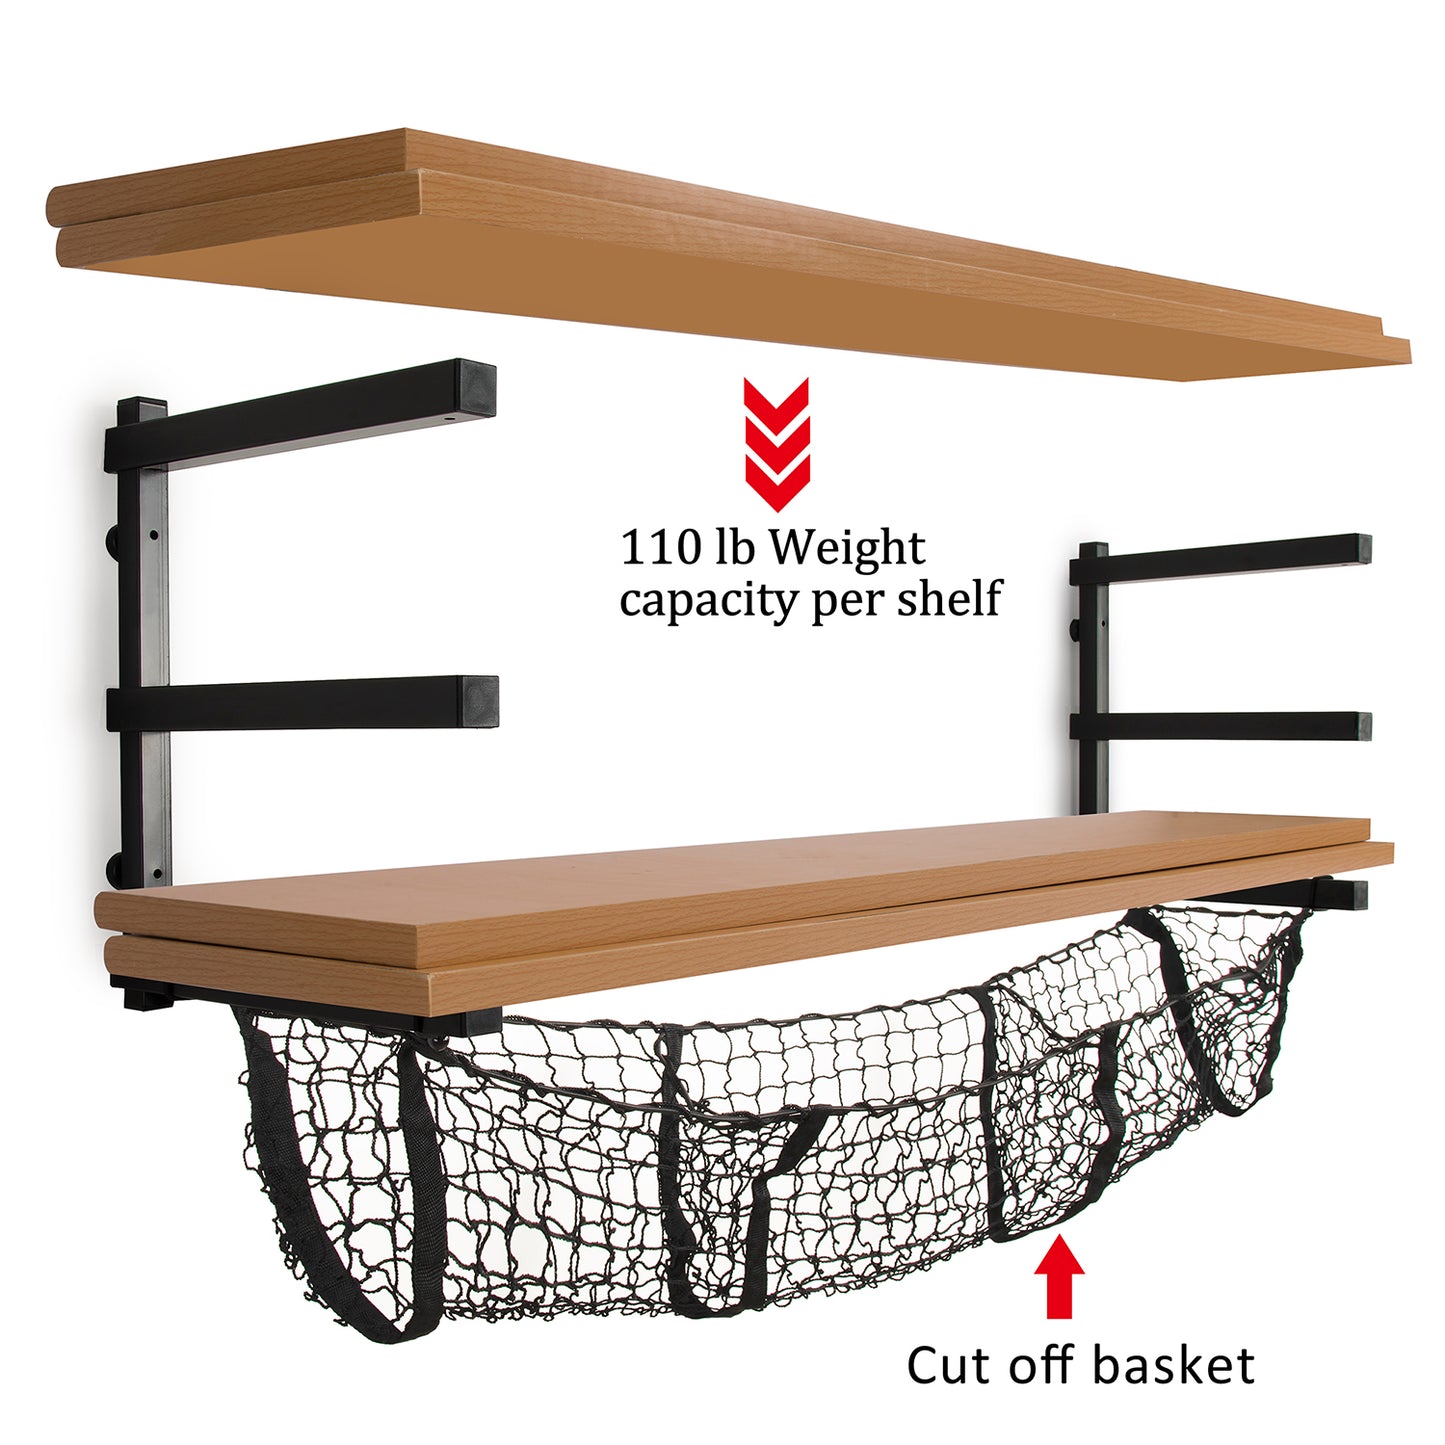 Lumber Rack Wood Storage Levels up to 260LBS Perfect for Wood Organized Including Cuts Off Basket Storage (4 Packs Lumber Rack)